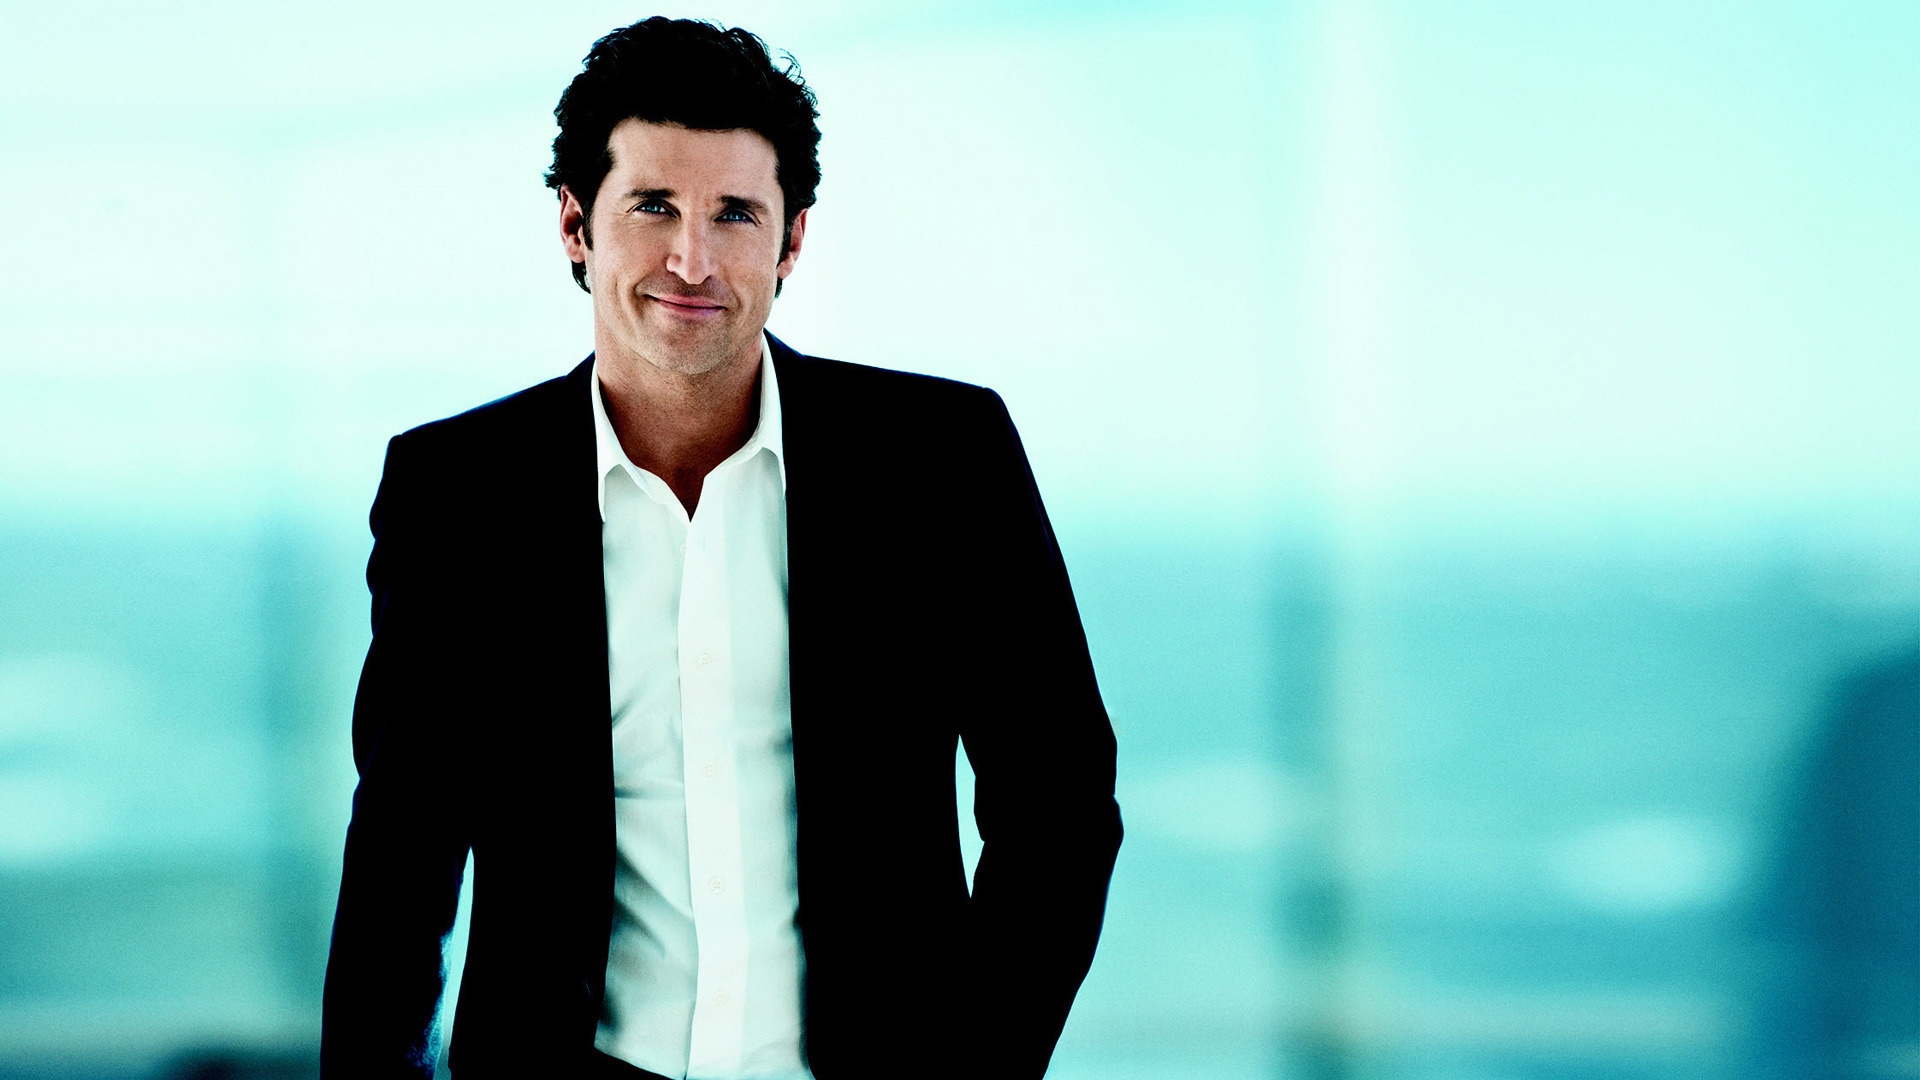 Patrick Dempsey for 1920 x 1080 HDTV 1080p resolution